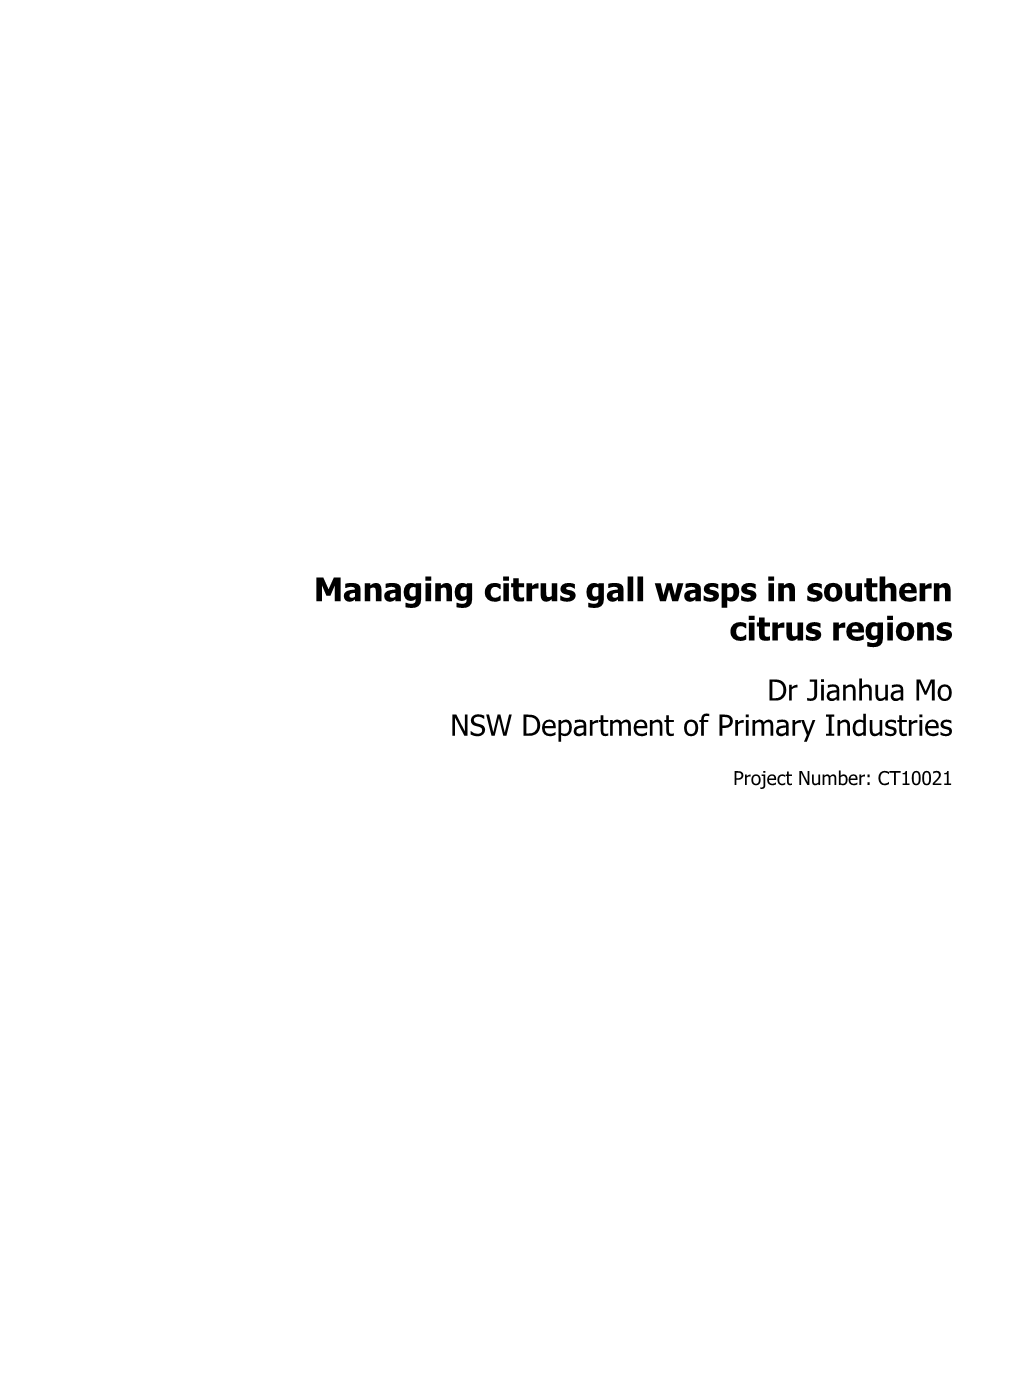 Managing Citrus Gall Wasps in Southern Citrus Regions